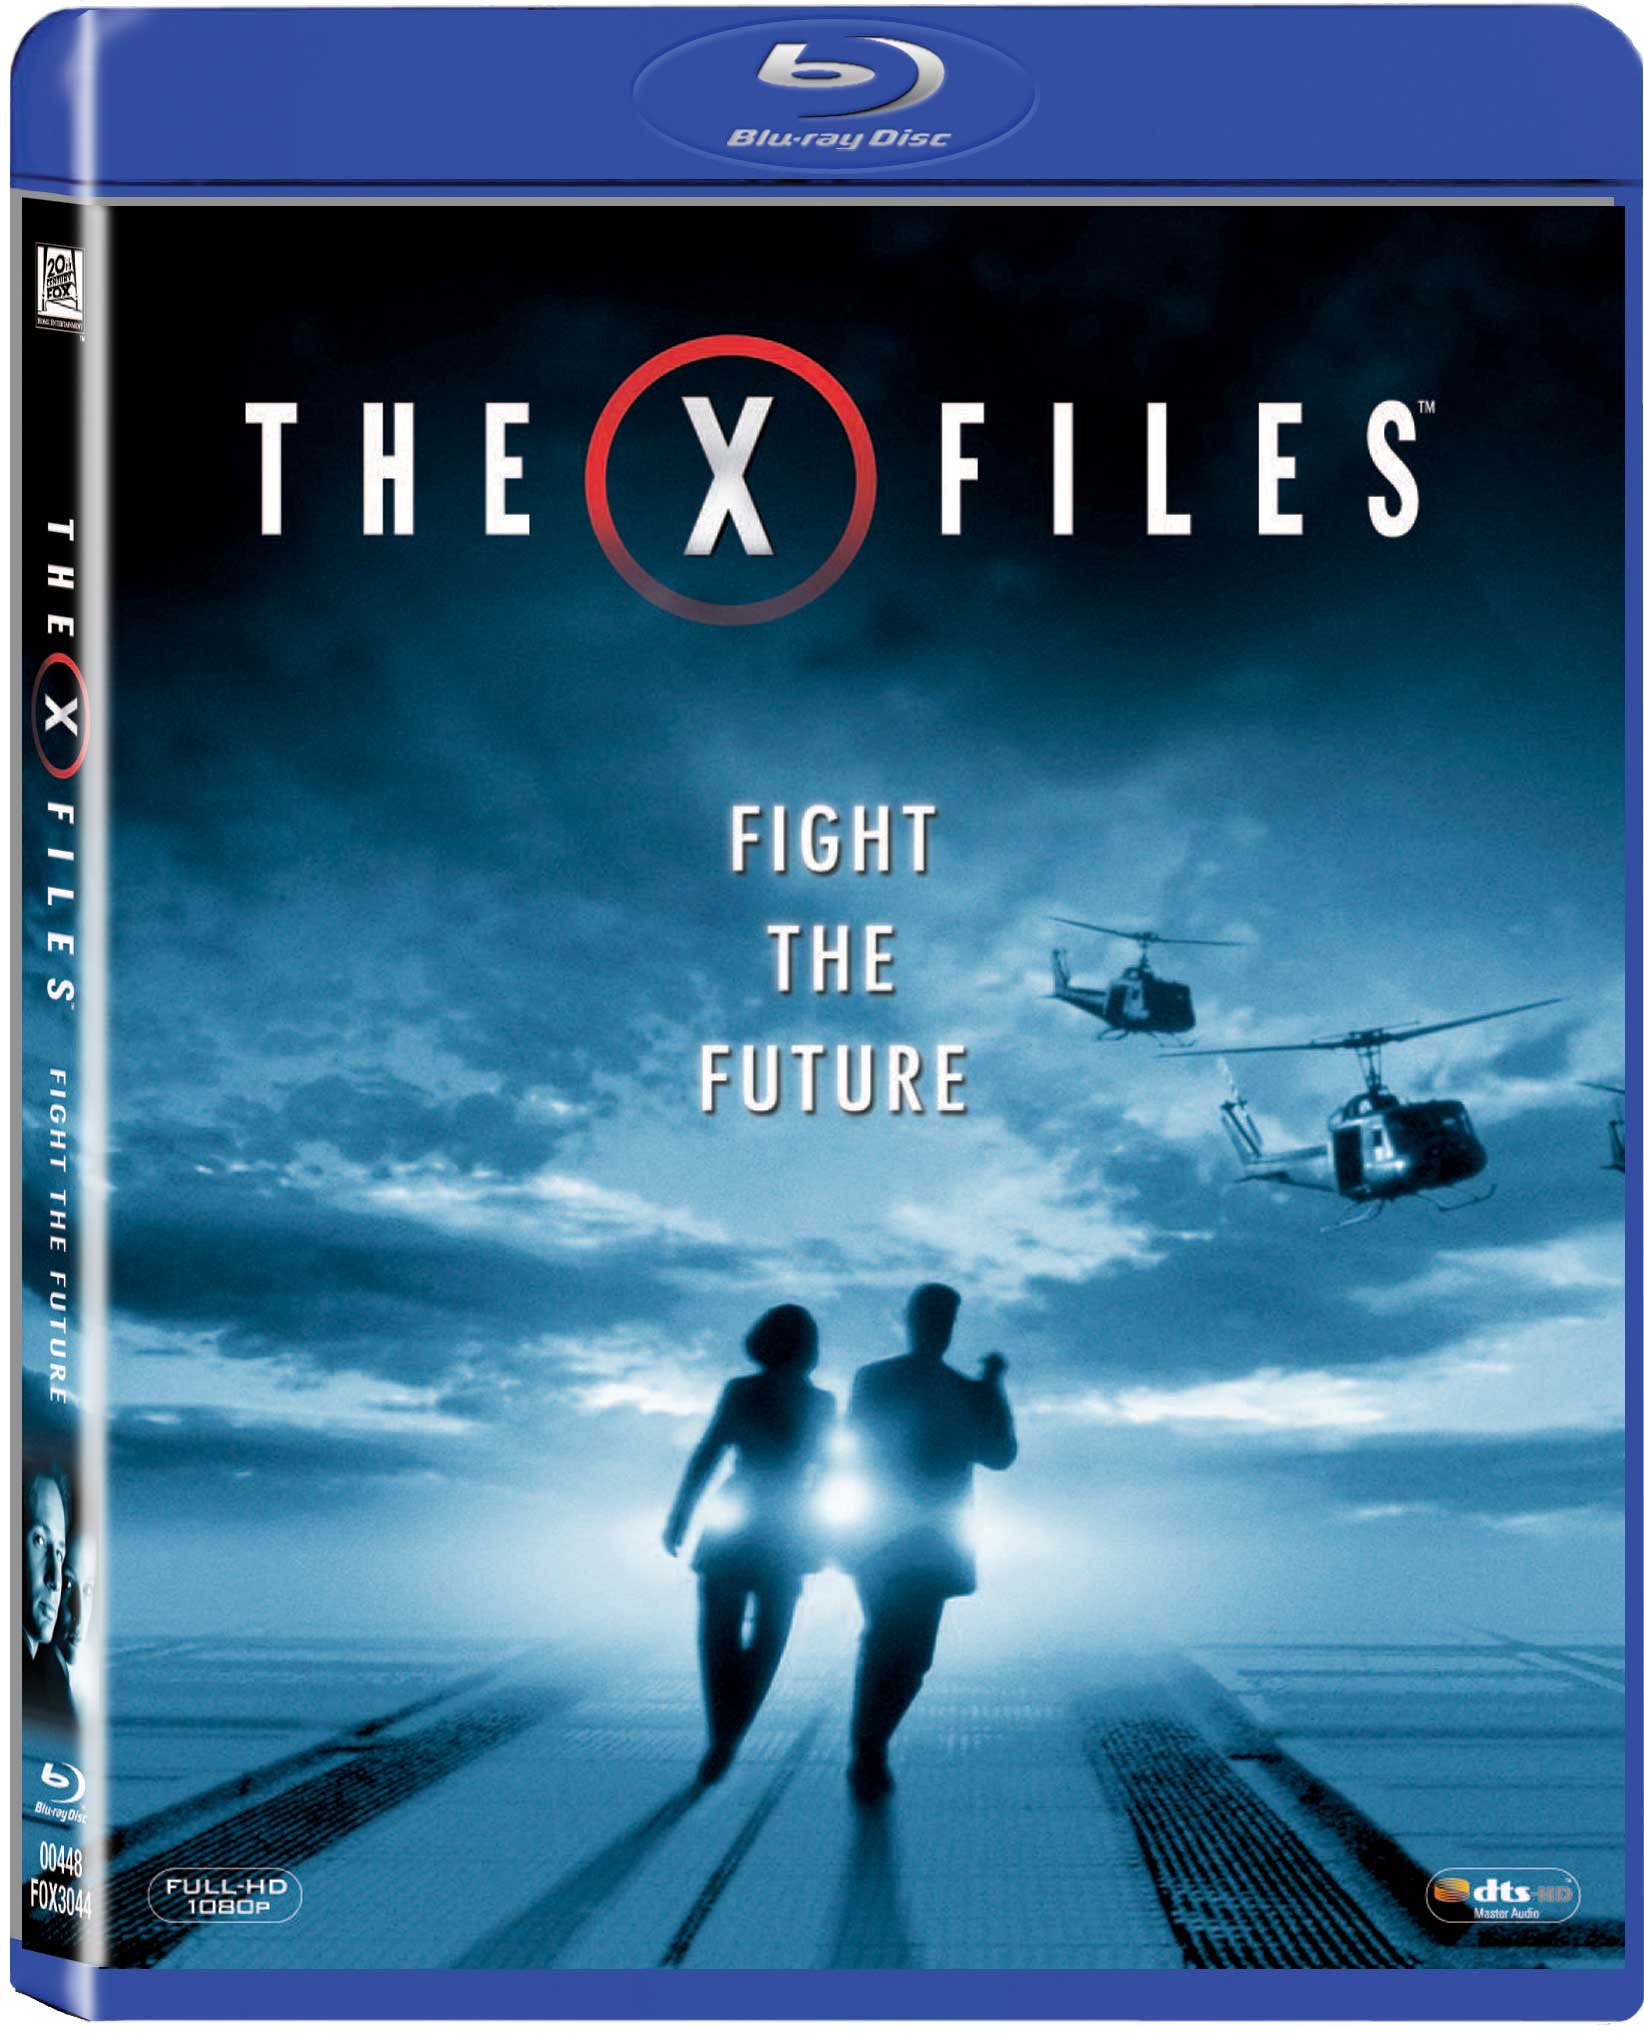 x-files-movie-purchase-or-watch-online